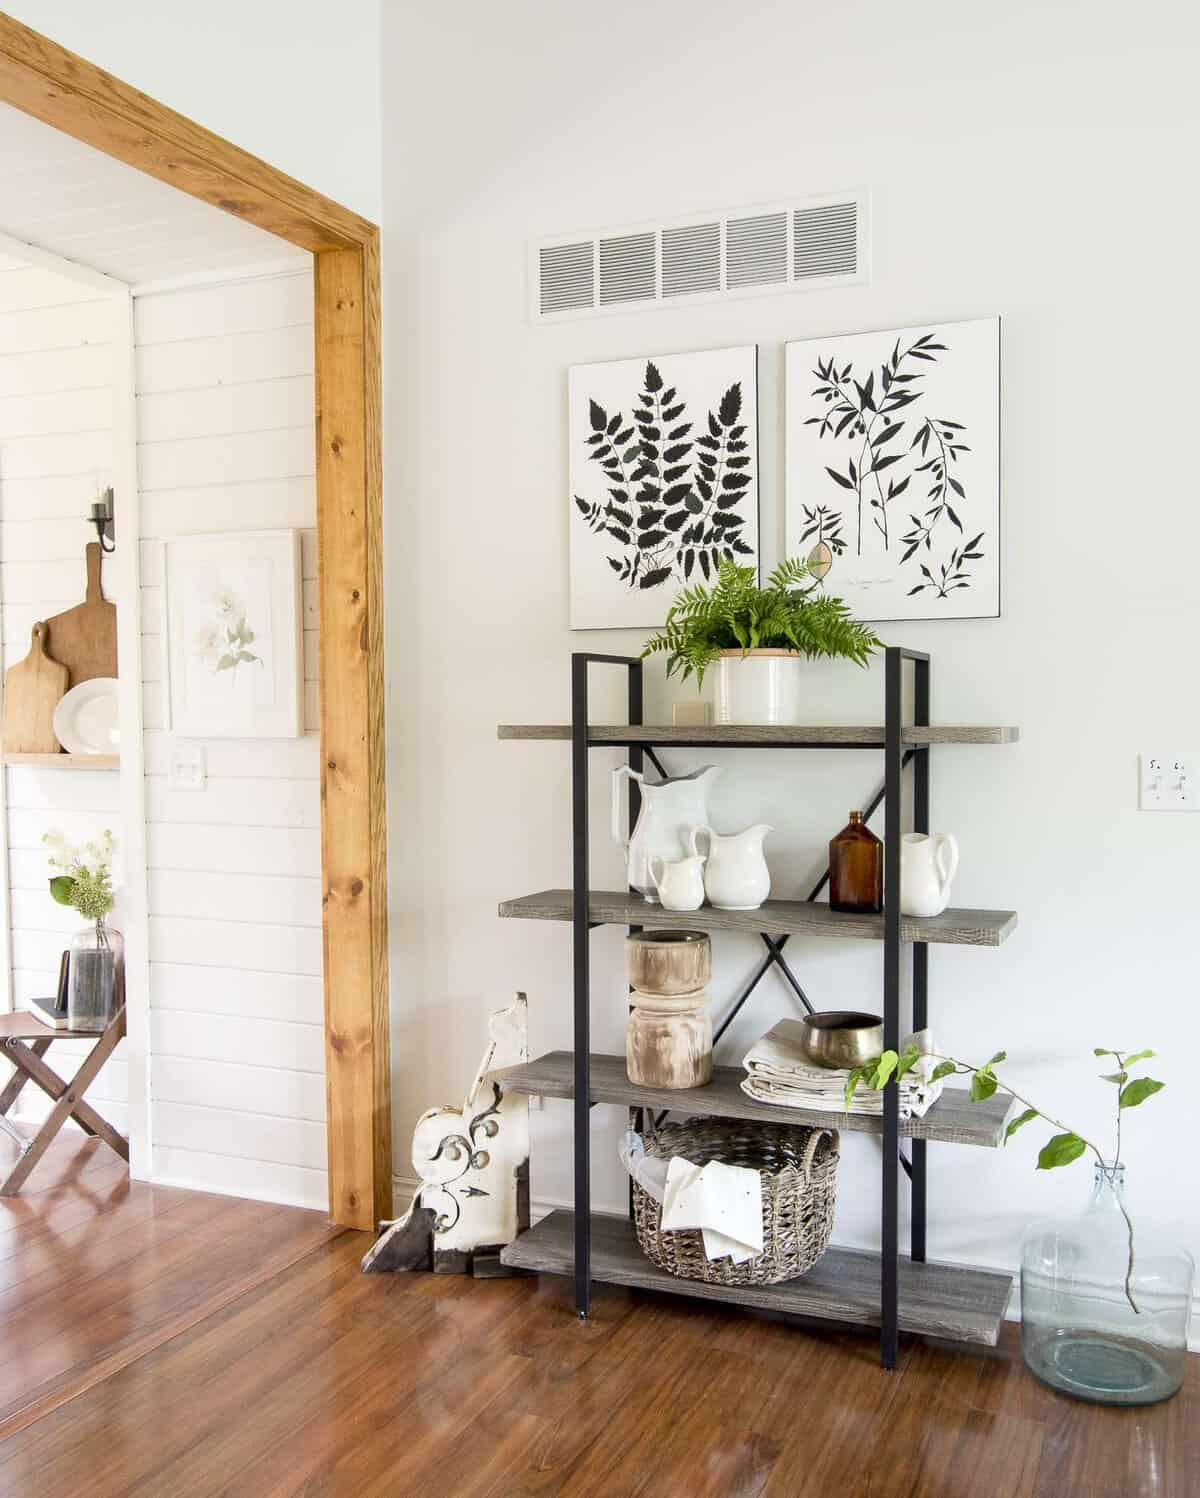 Ready to transform your home to the modern farmhouse design style? Here is my full home style guide with my best modern farmhouse decor sources. #fromhousetohaven #farmhouseinteriordesign #modernfarmhousestyle